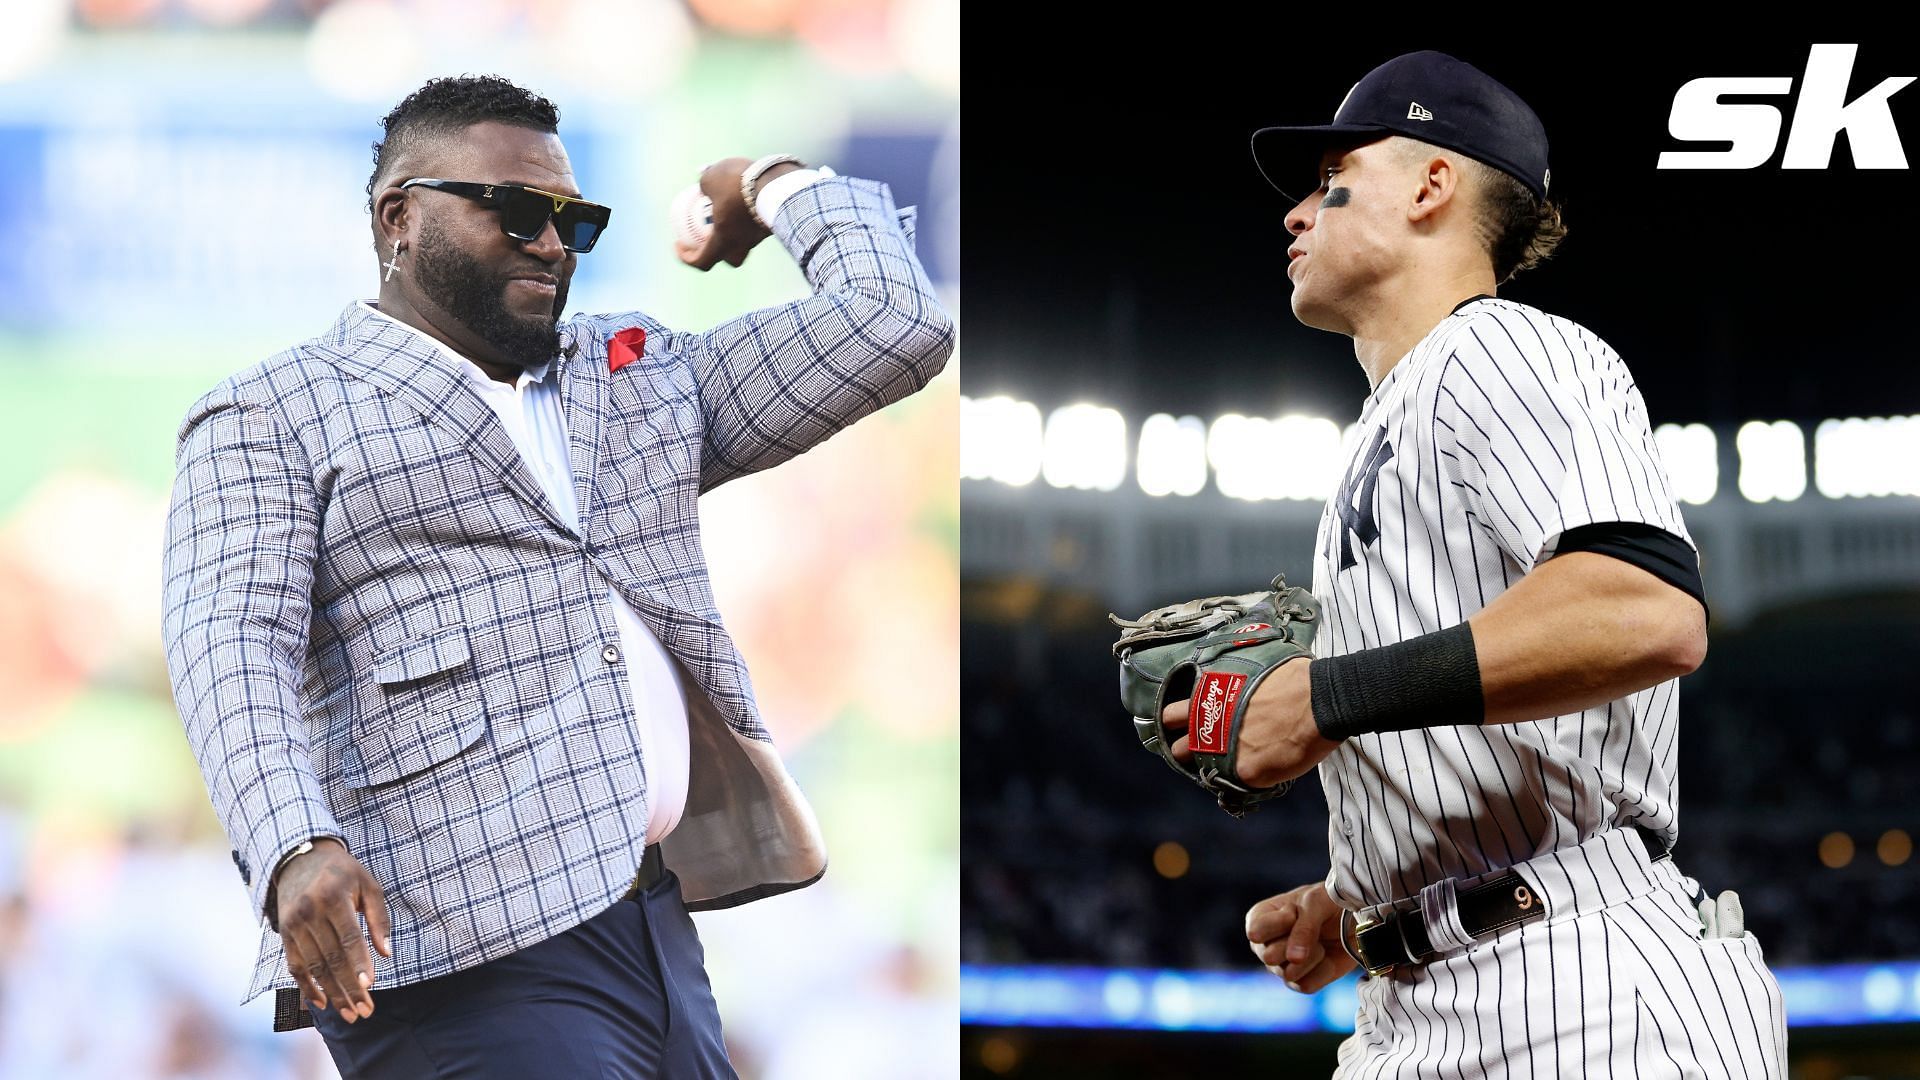 David Ortiz believes Aaron Judge could sign with the New York Mets after the 2022 MLB season